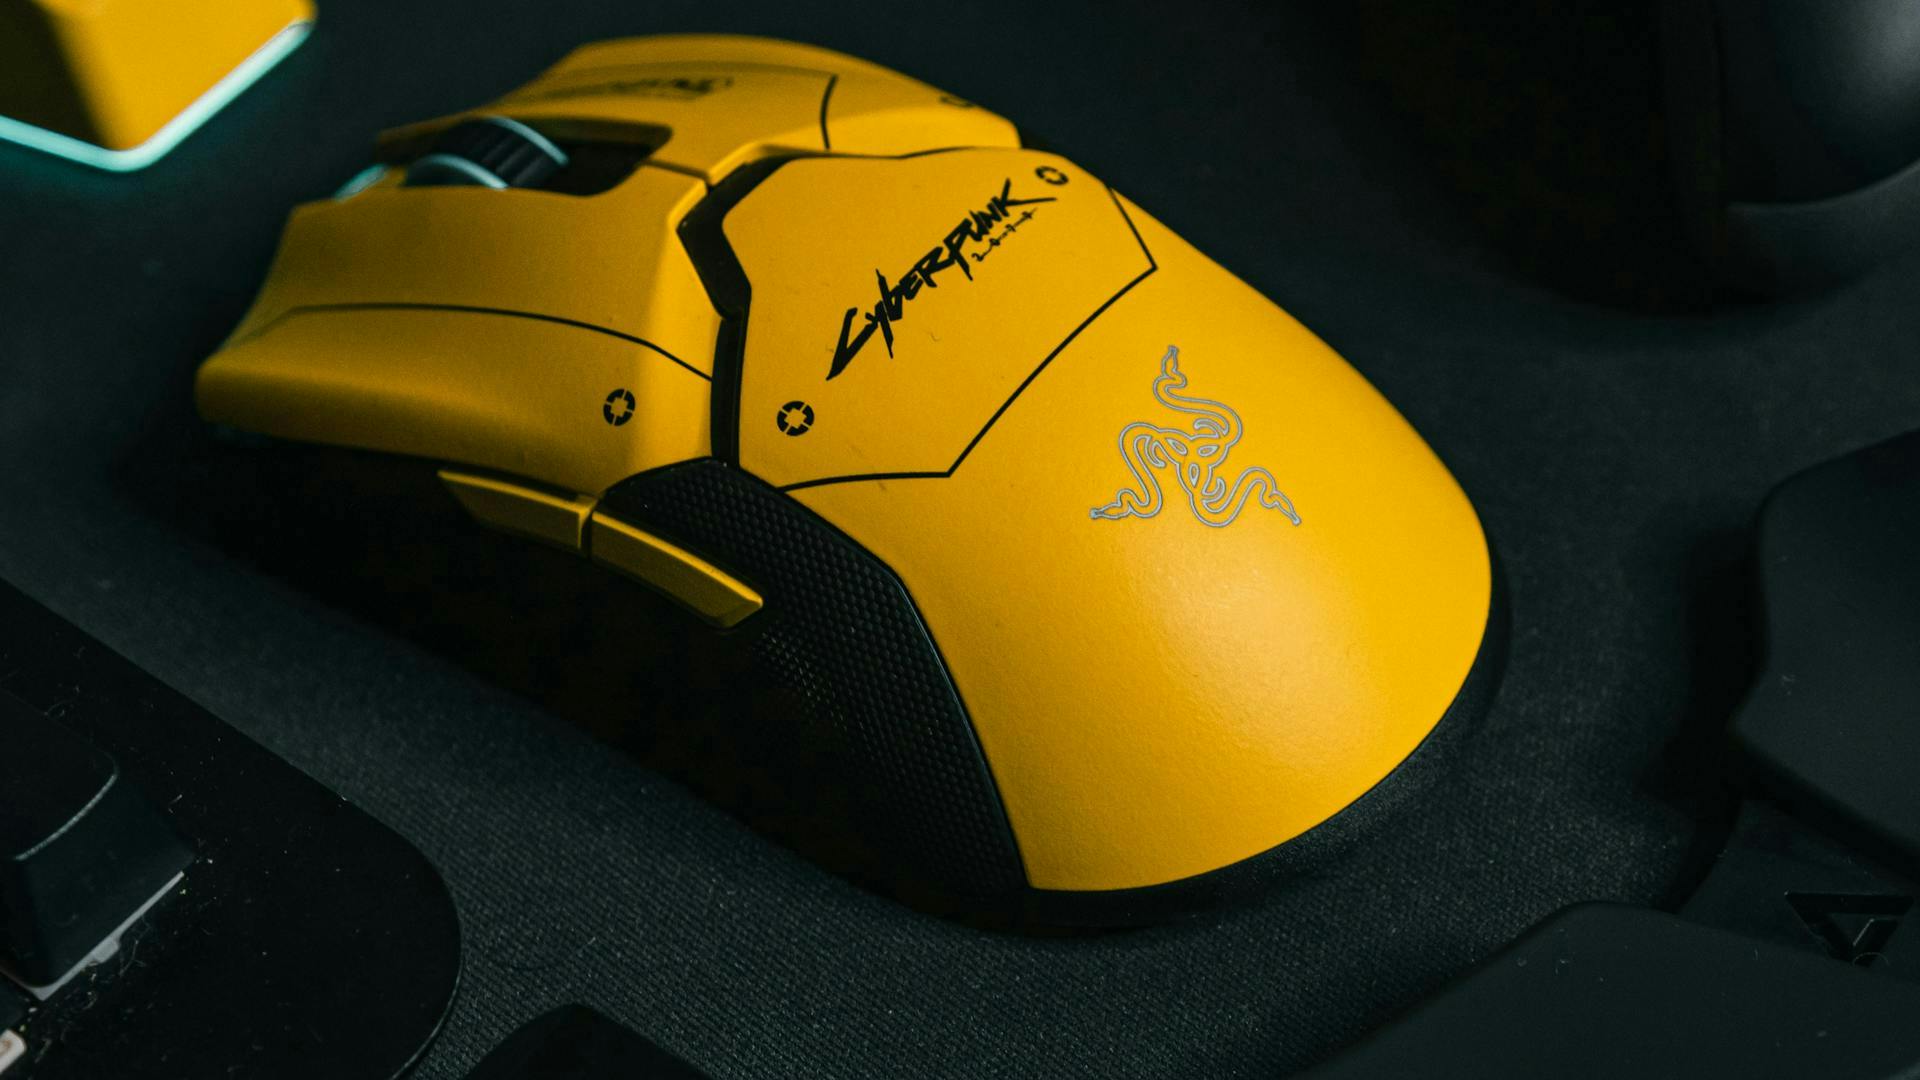 A gaming mouse with a Cyberpunk 2077 look, viewed from the side with two additional buttons. | Credit: Robert Torres / Unsplash.